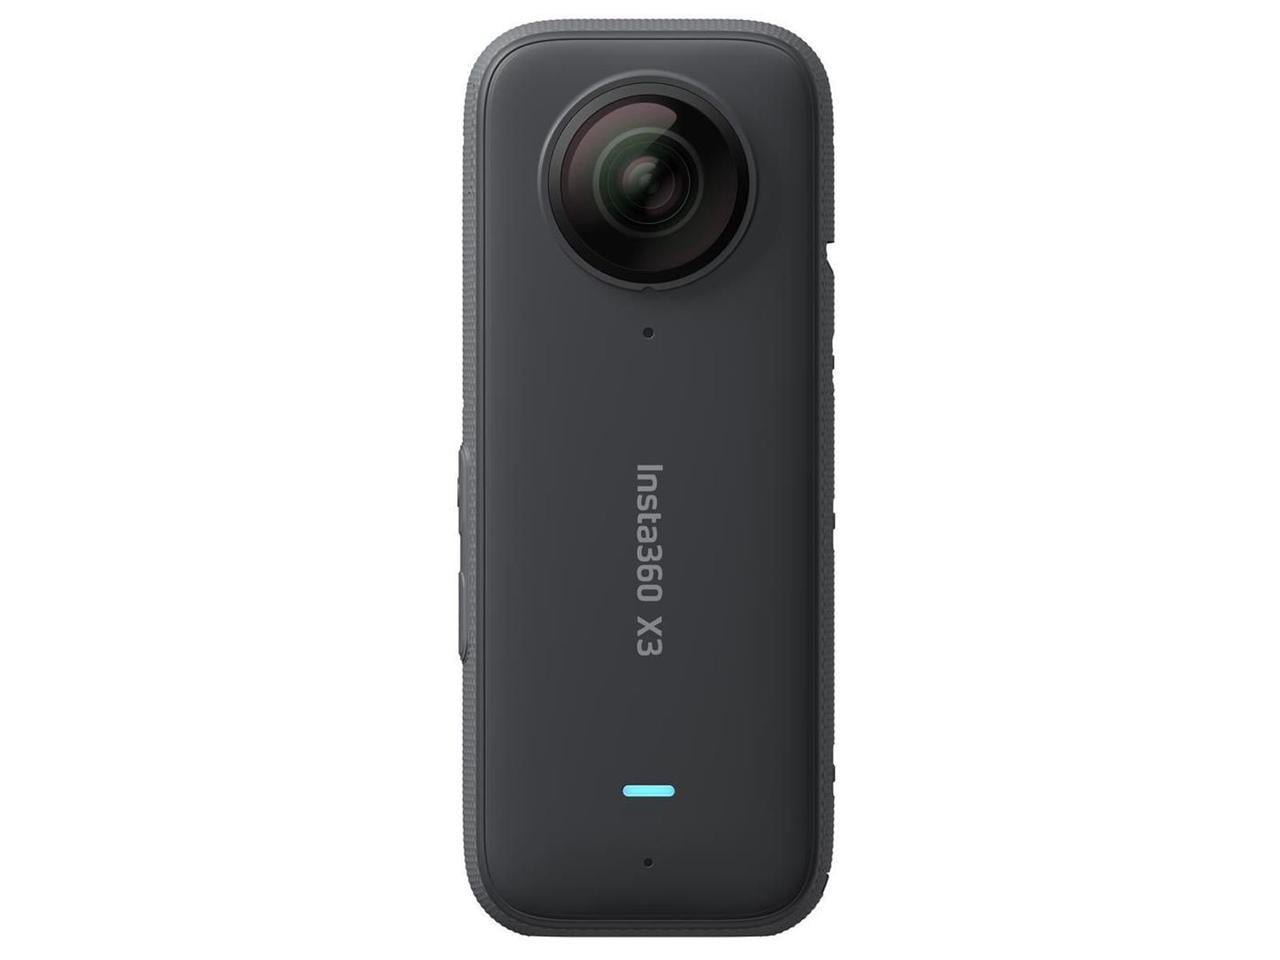 Insta360 X3 - 360 action camera - 5.7K / 30 fps - 72 MP - Wi-Fi, Bluetooth  up to 30ft - black